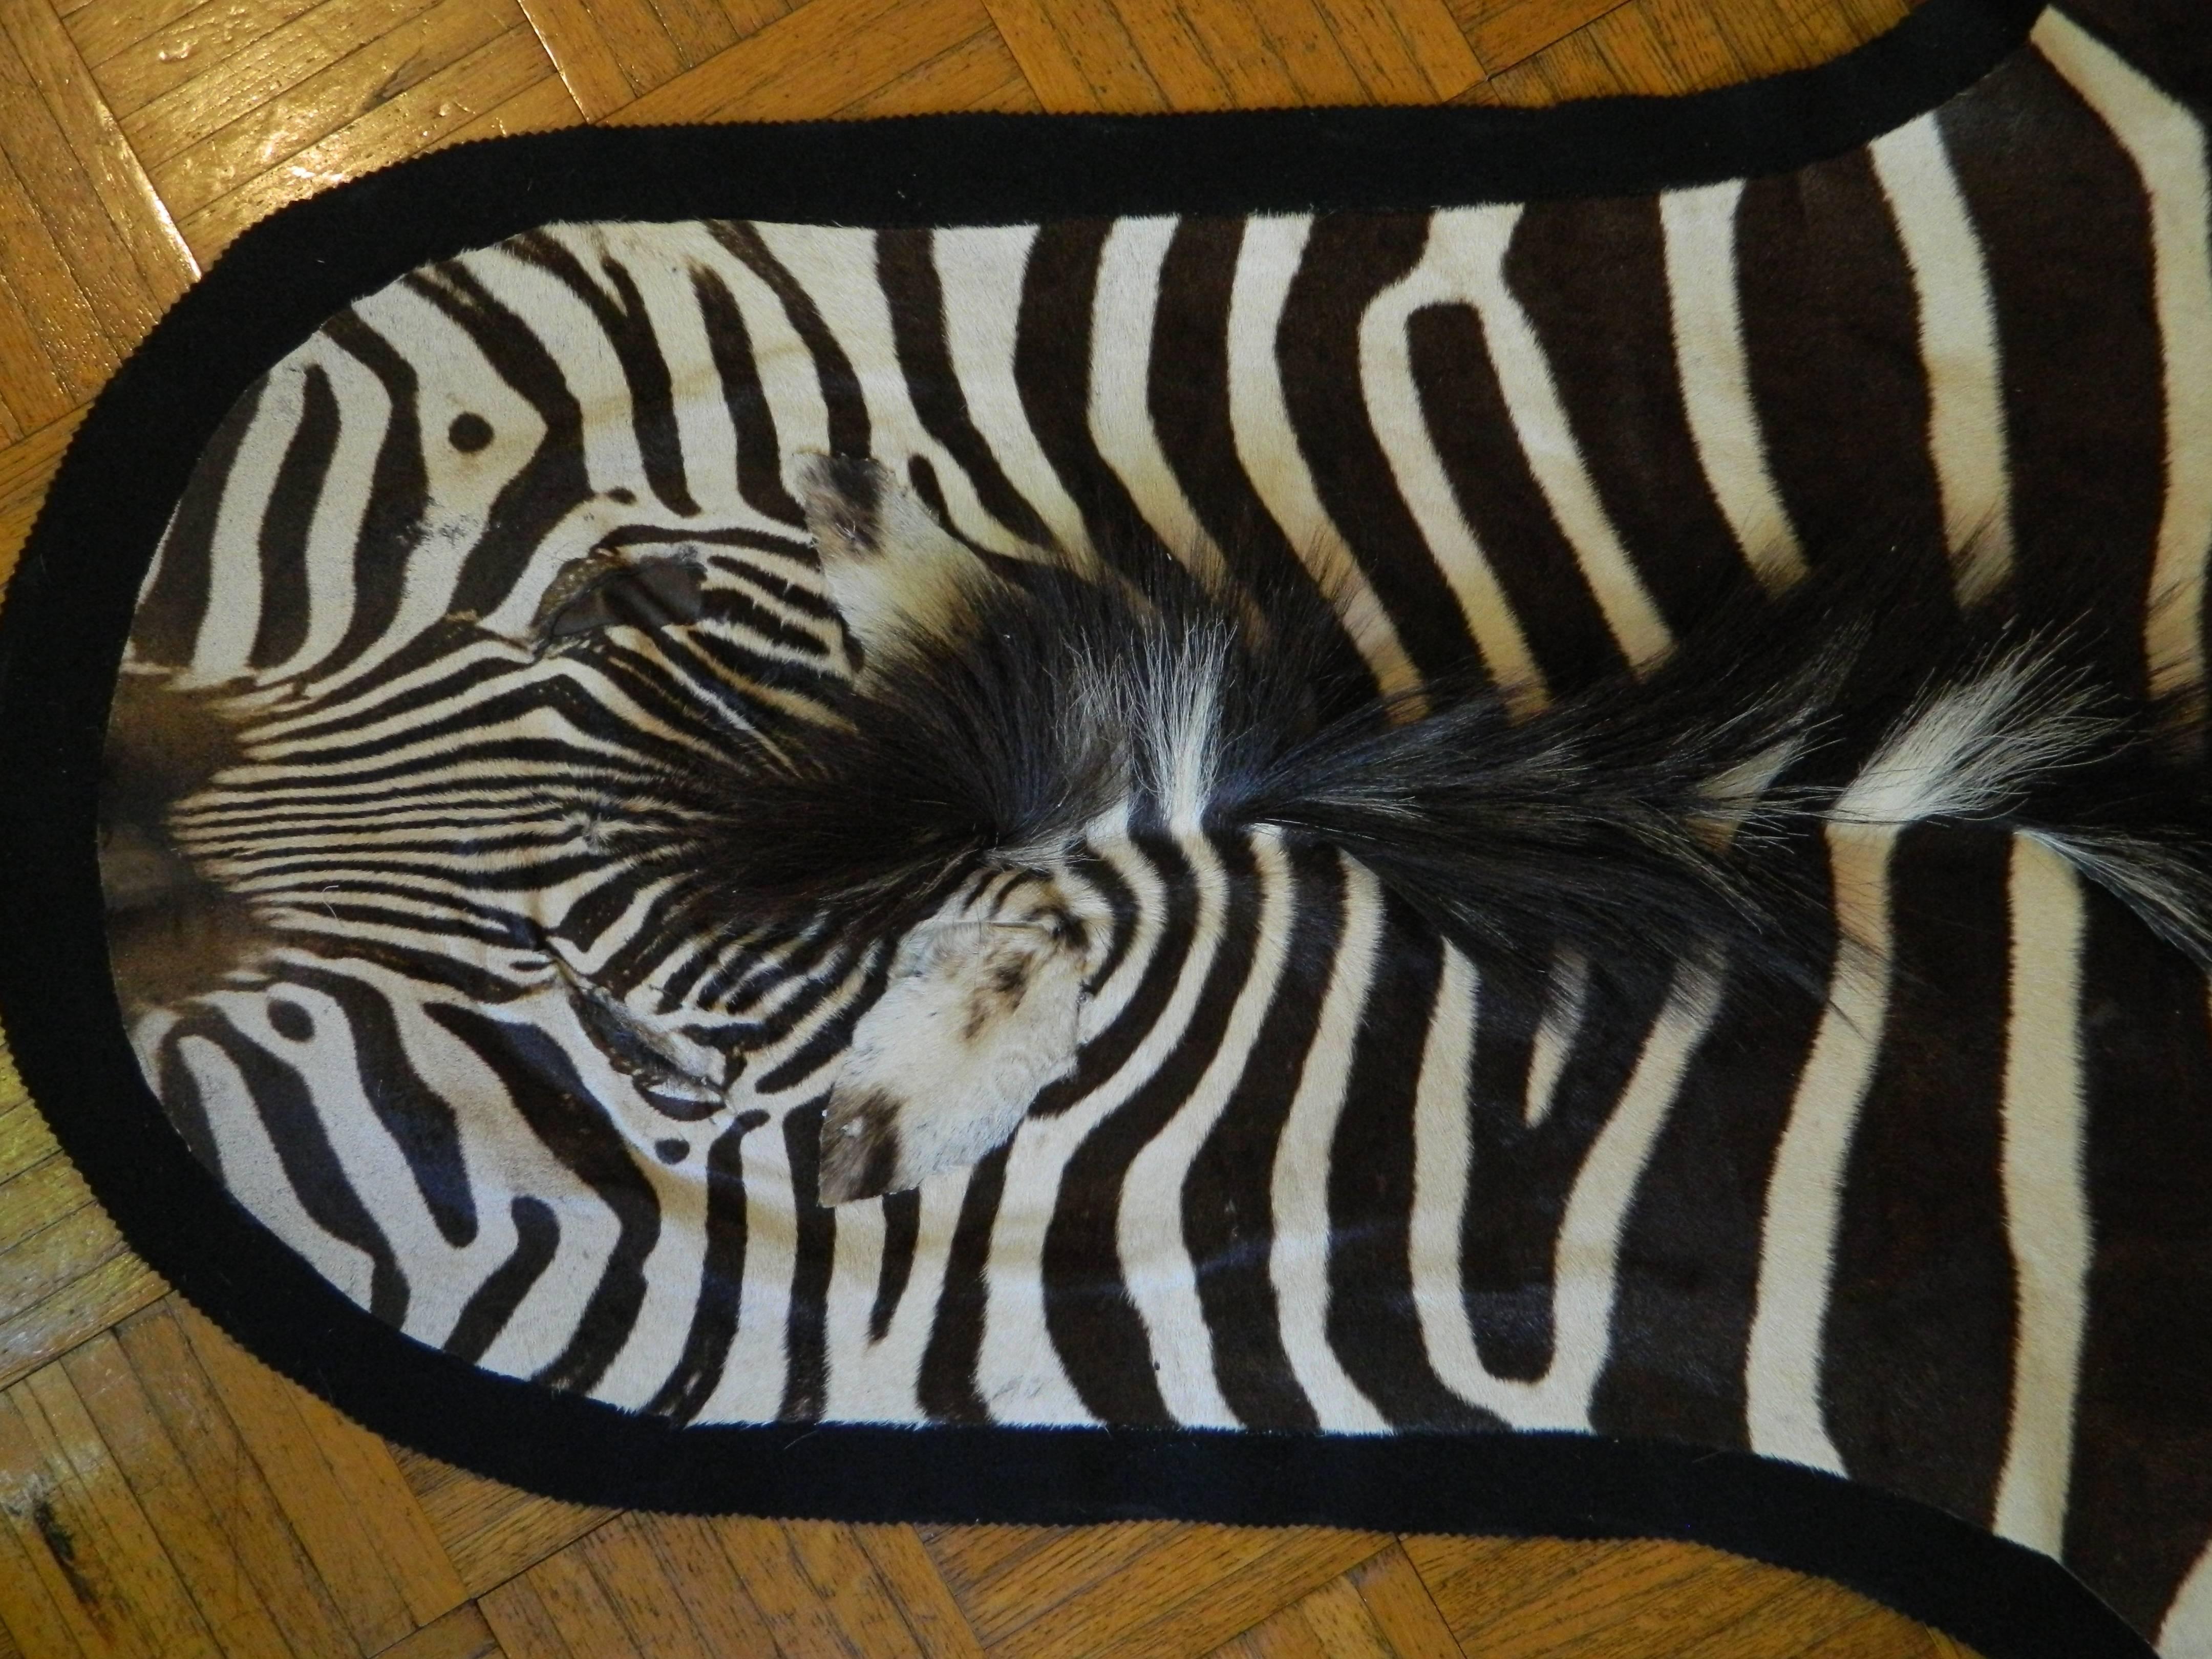 New great quality Burchel zebra hide
Size: 87" L x 54" W, excluding the tail,
Country of origin: South Africa 

Please contact us for any other information.